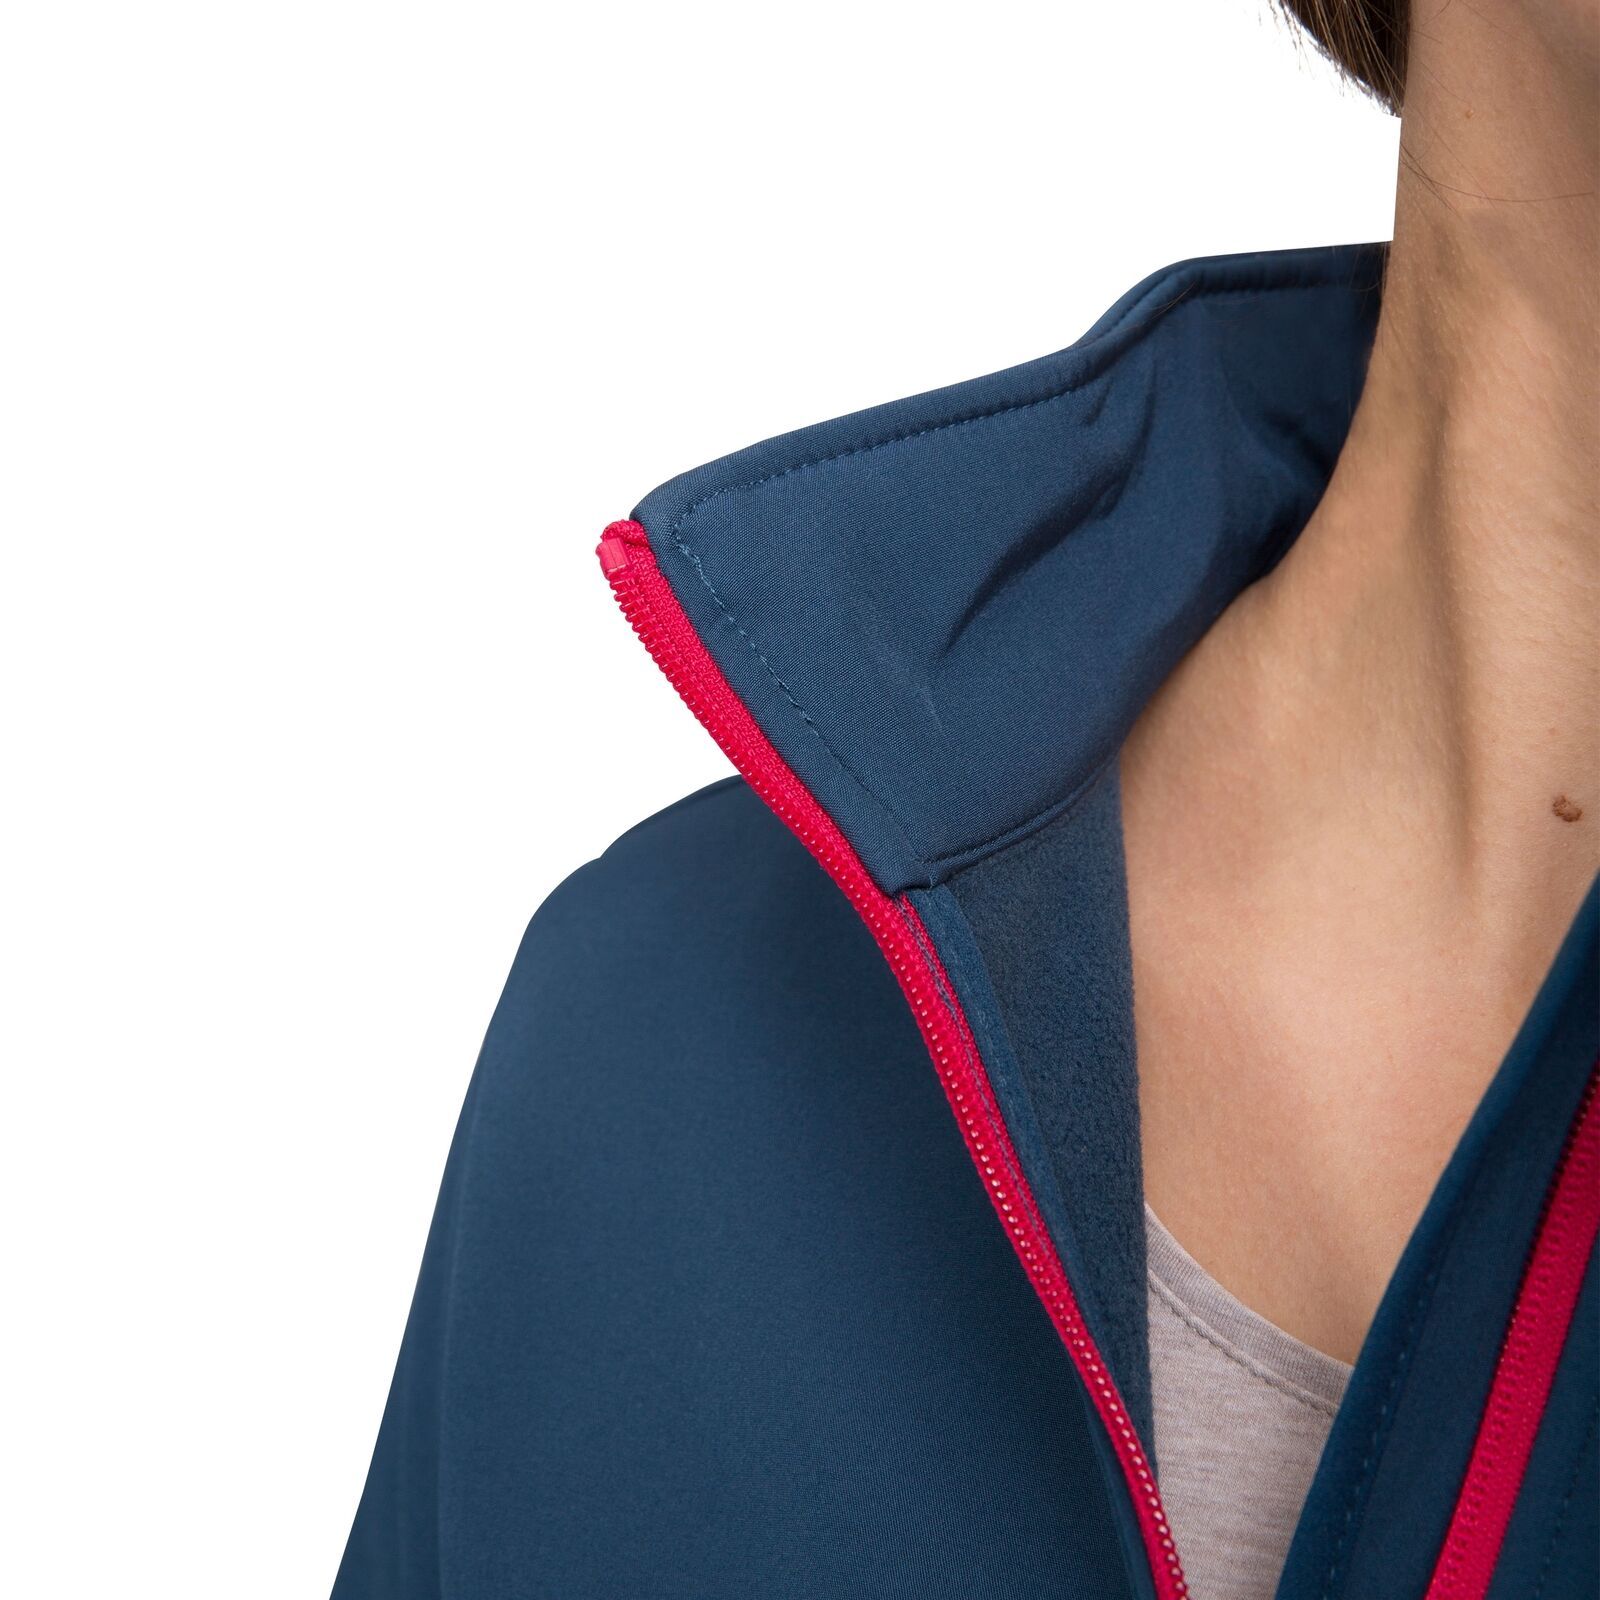 Windproof. Lightweight. 2 Zip Pockets. Drawcord at Hem. Contrast Zips. 94% Polyester, 6% Elastane. Trespass Womens Chest Sizing (approx): XS/8 - 32in/81cm, S/10 - 34in/86cm, M/12 - 36in/91.4cm, L/14 - 38in/96.5cm, XL/16 - 40in/101.5cm, XXL/18 - 42in/106.5cm.